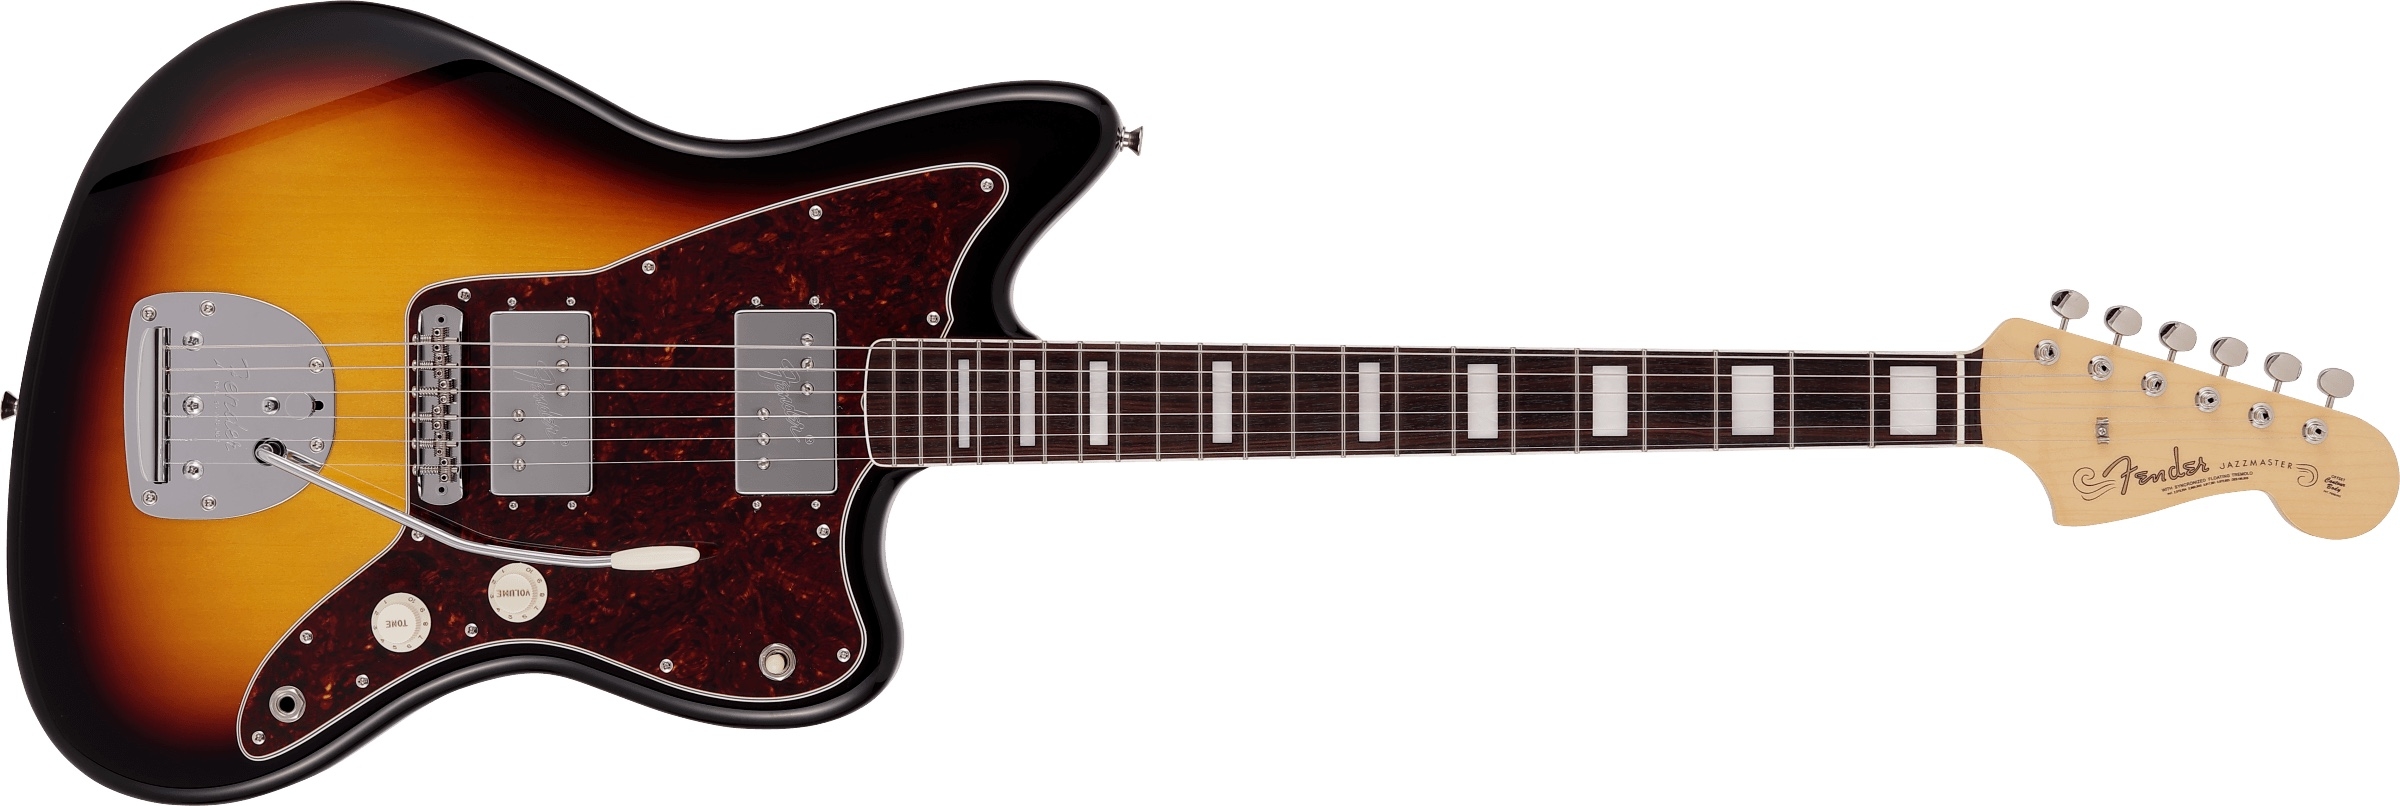 Fender MIJ Limited Collection Jazzmaster - ギター